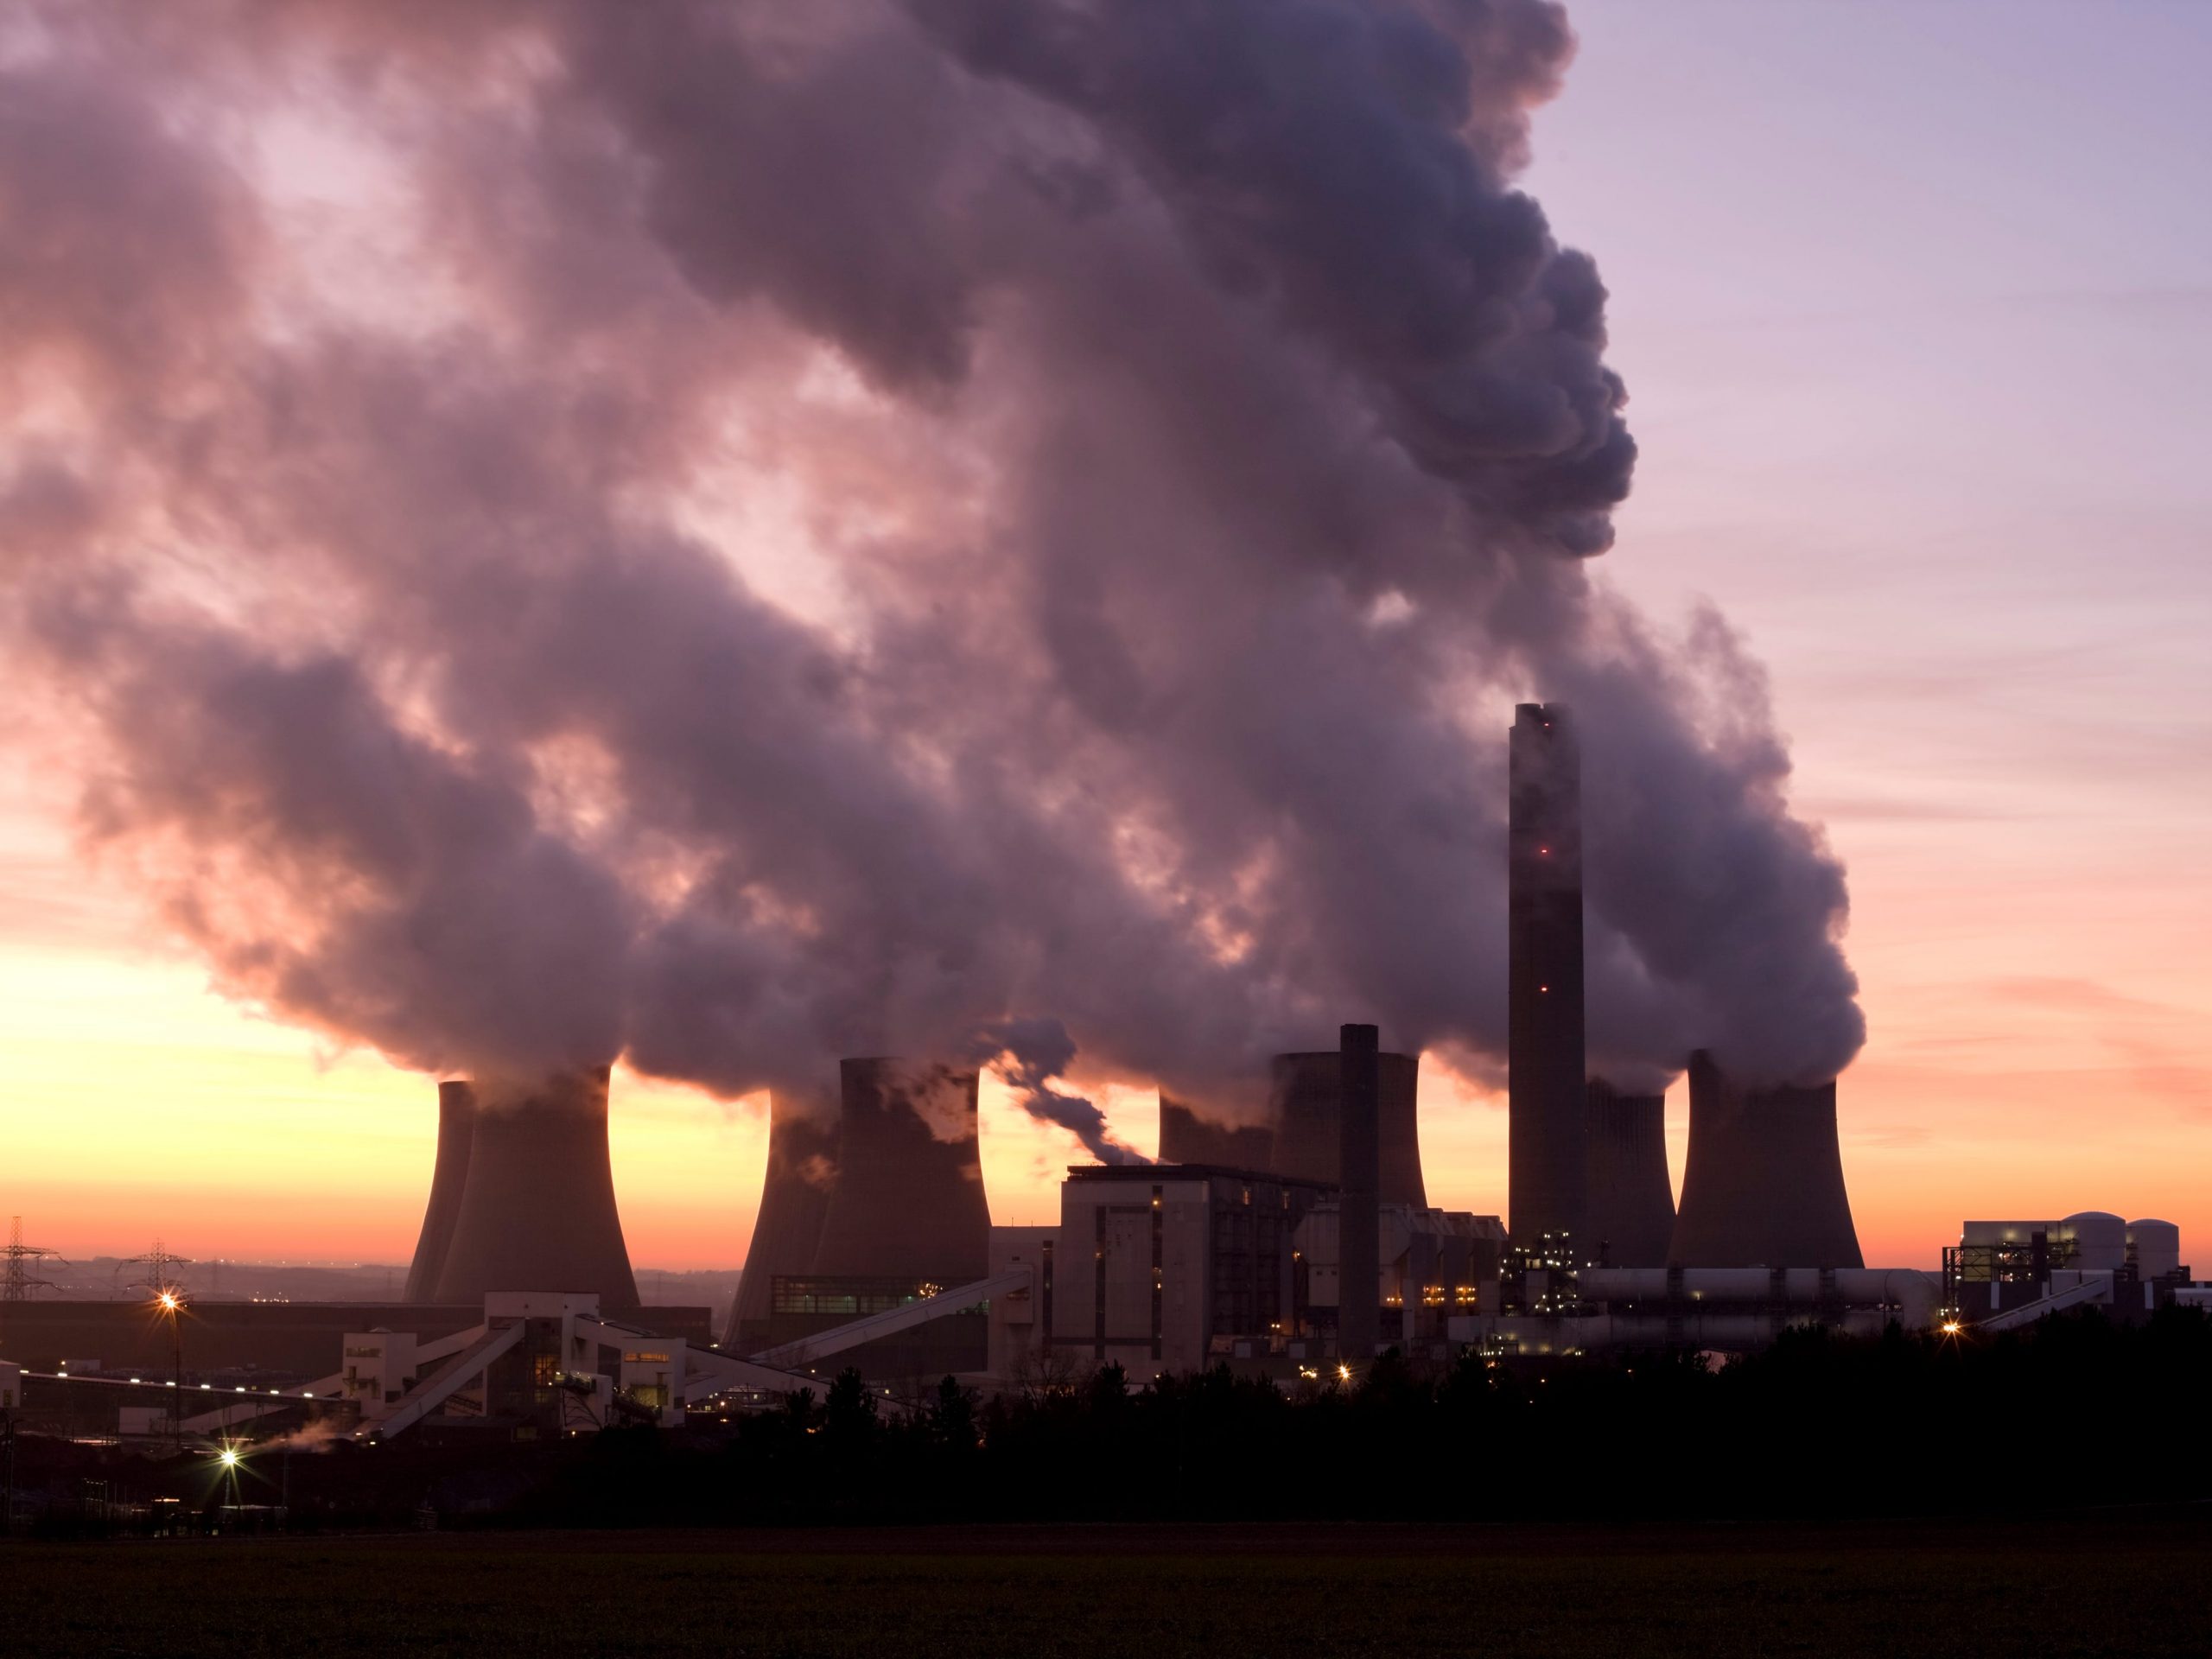 A coal fueled power station at sunset with smoke coming from its stacks, Ratcliffe-On-Soar, Nottingham, England, U.K.